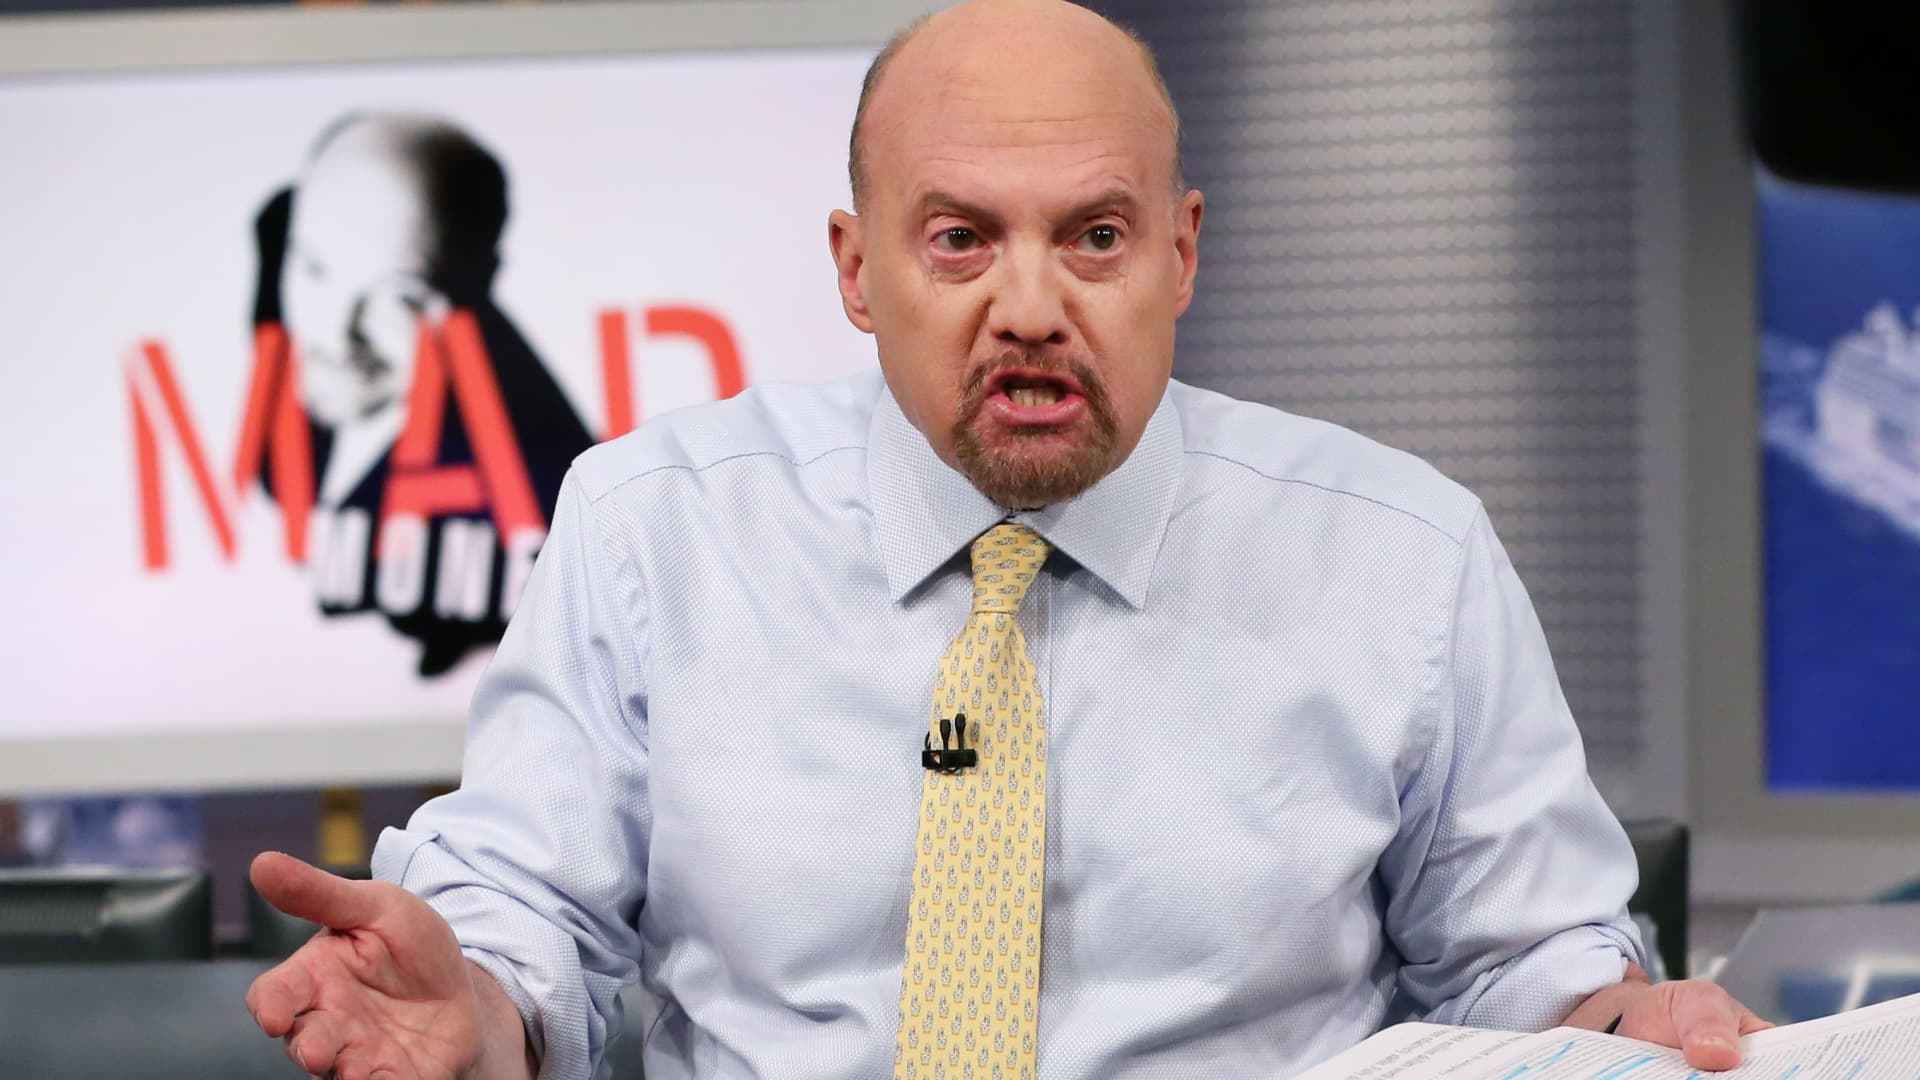 Jim Cramer's 'dirty dozen' stocks that underscore the carnage in the IPO market